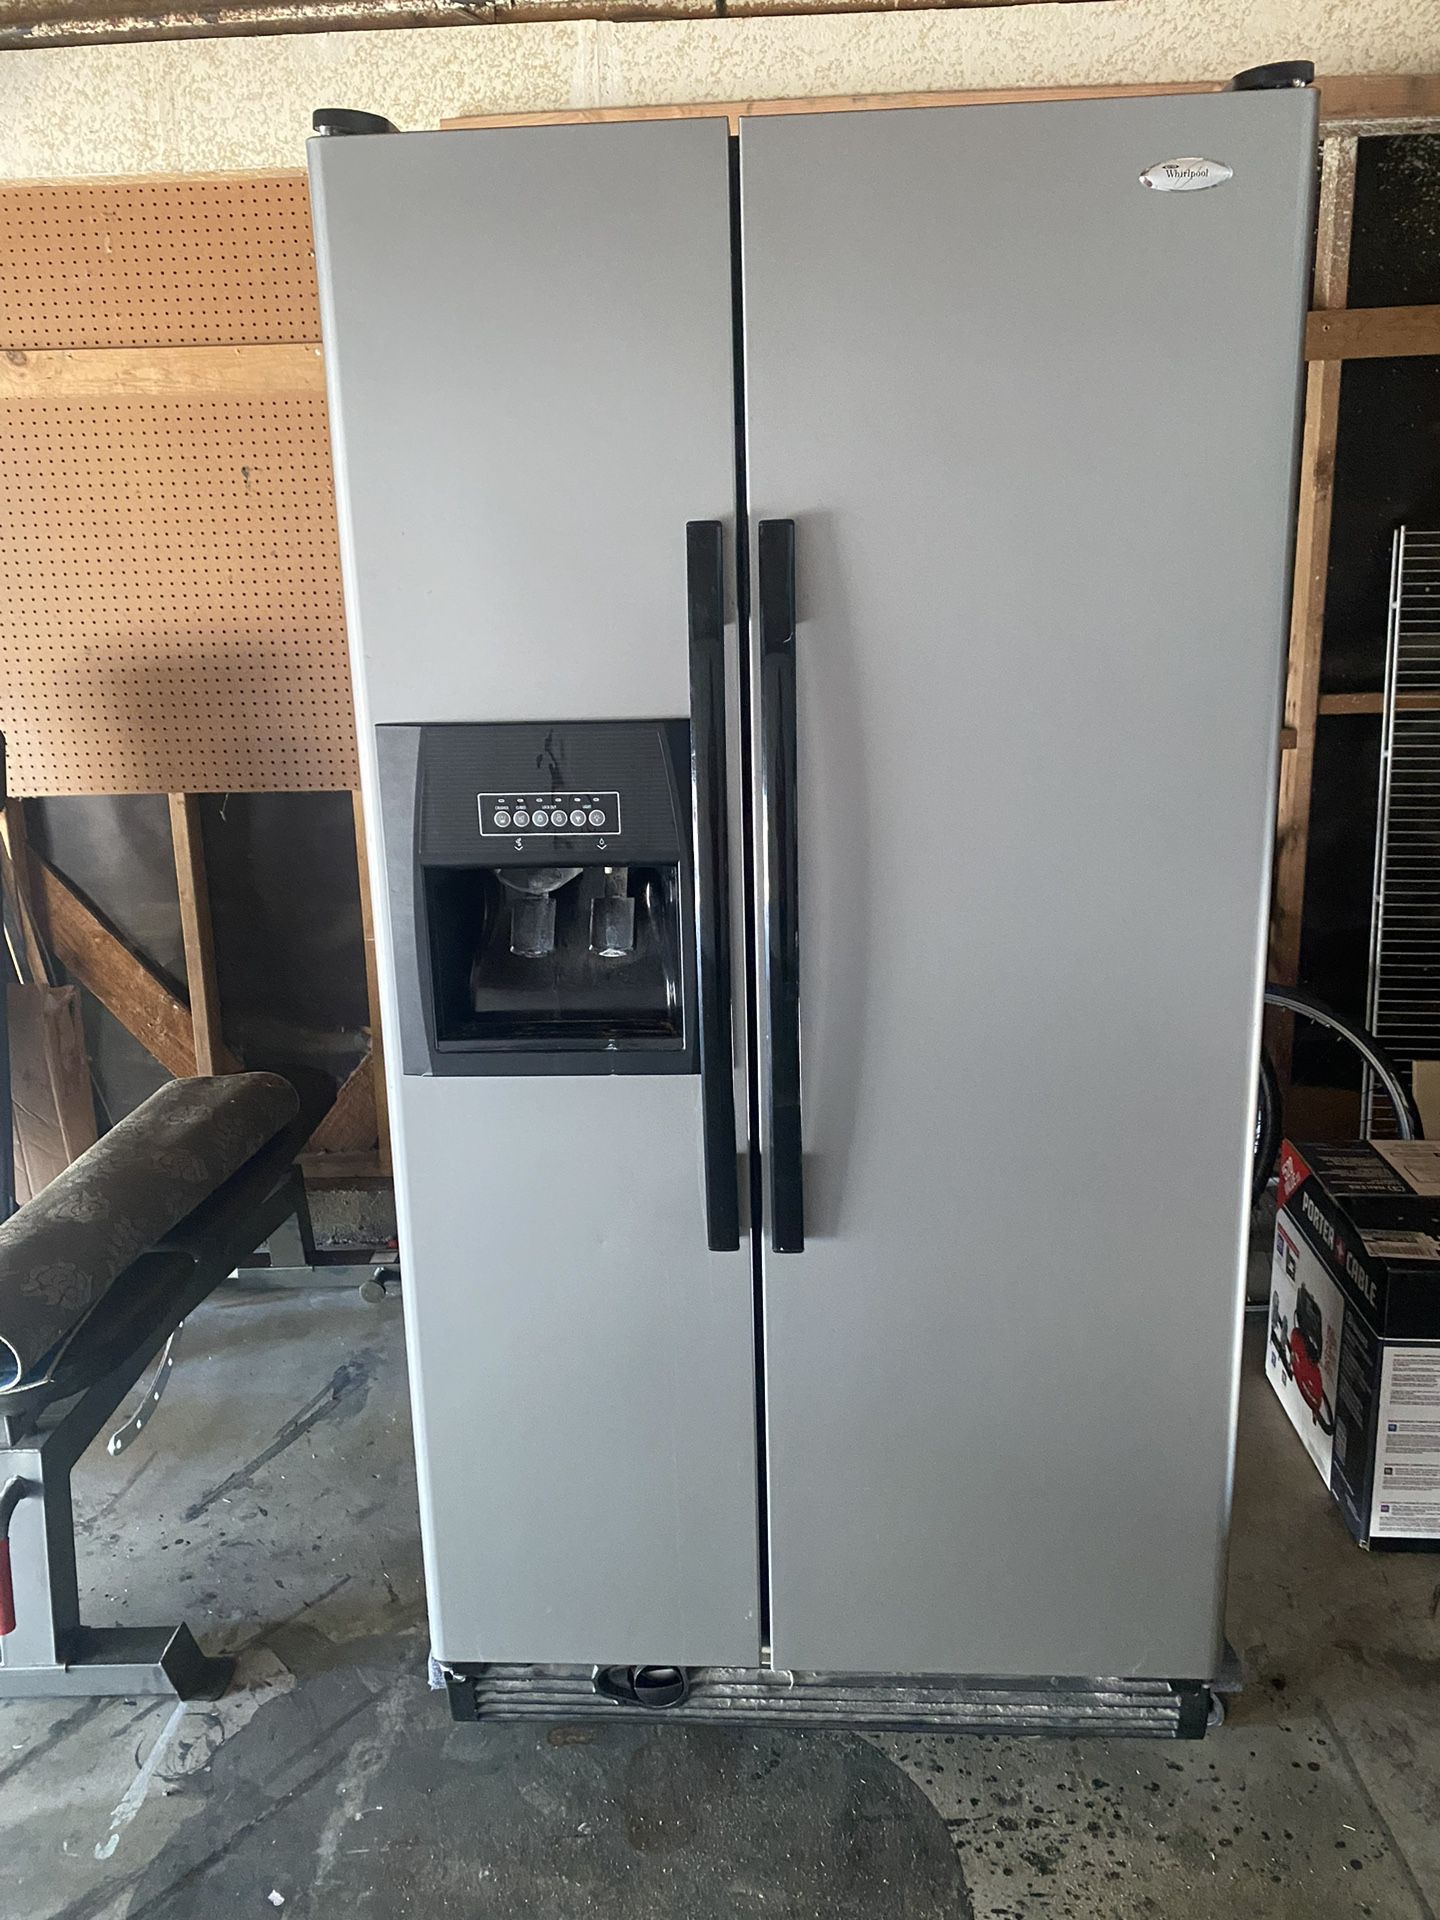 Refrigerator with Working Water And Ice Dispenser